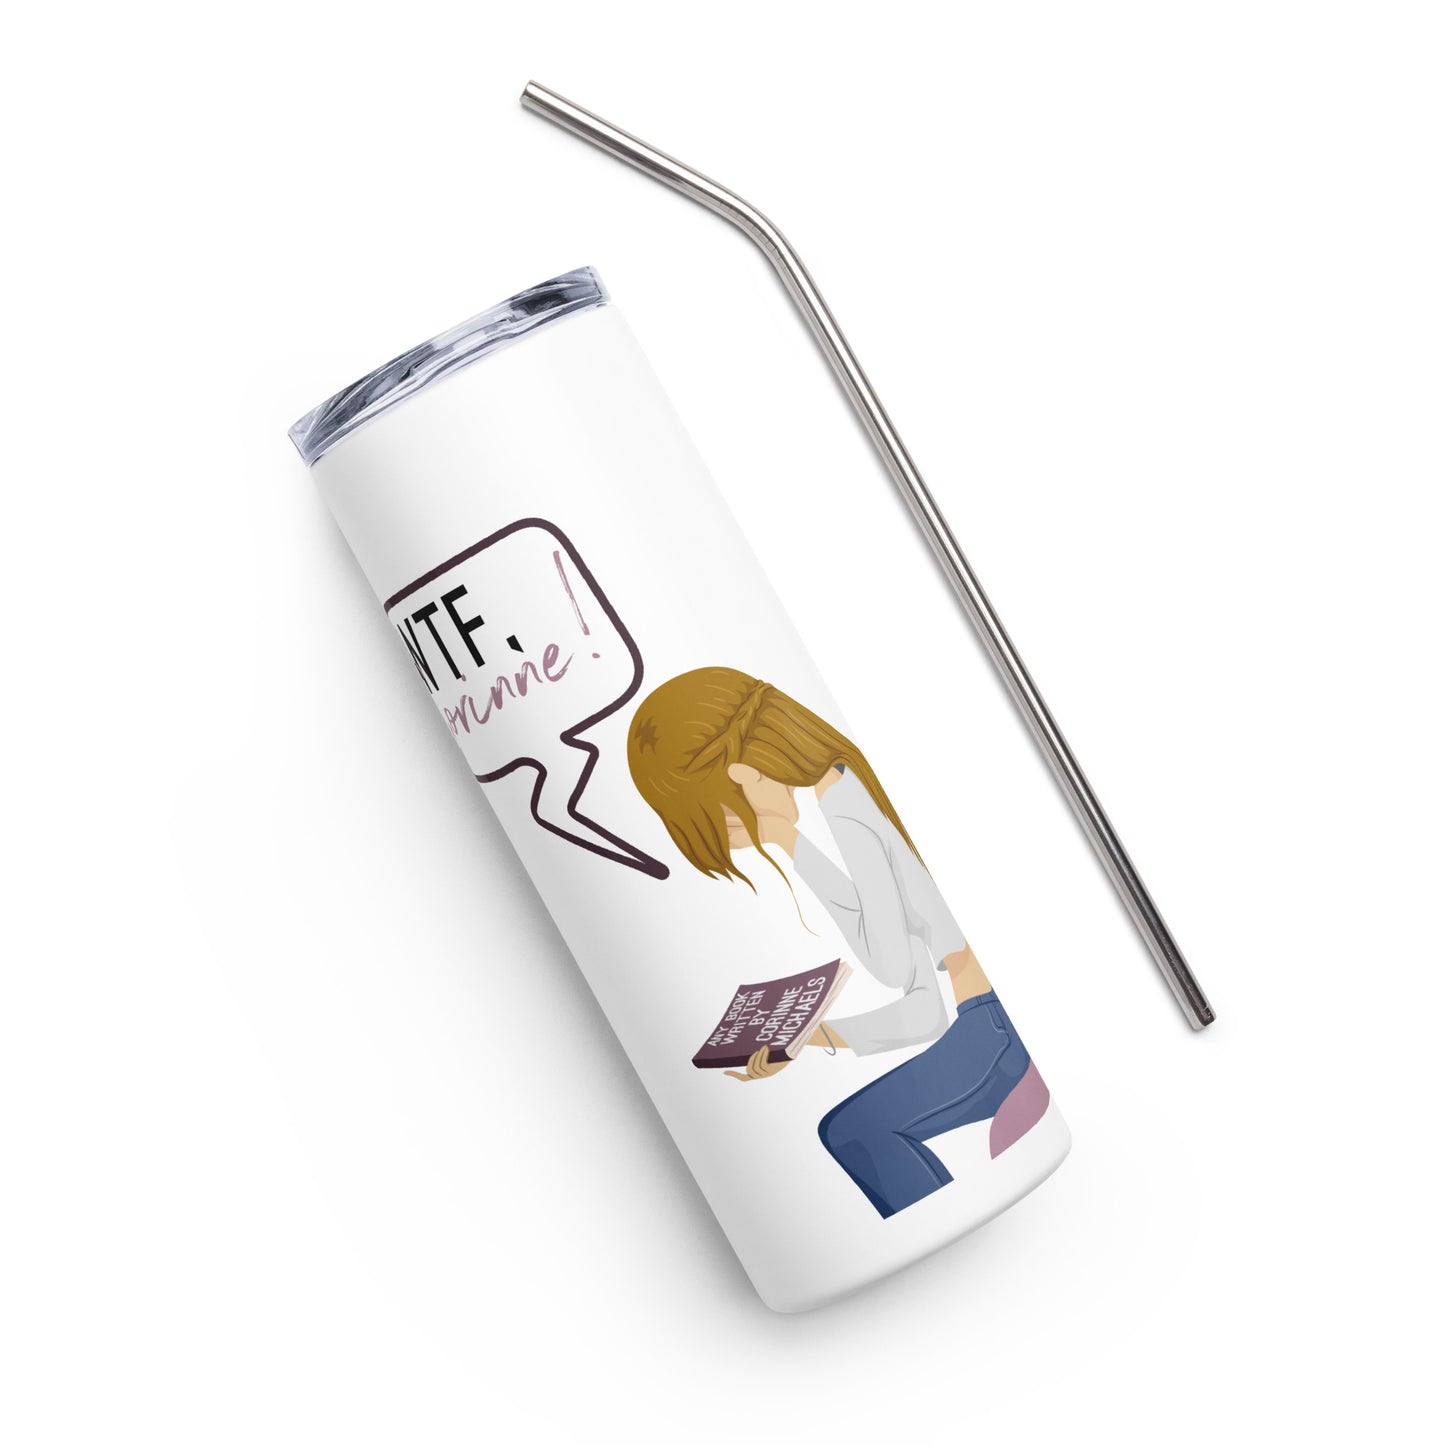 WTF Corinne - Stainless steel tumbler